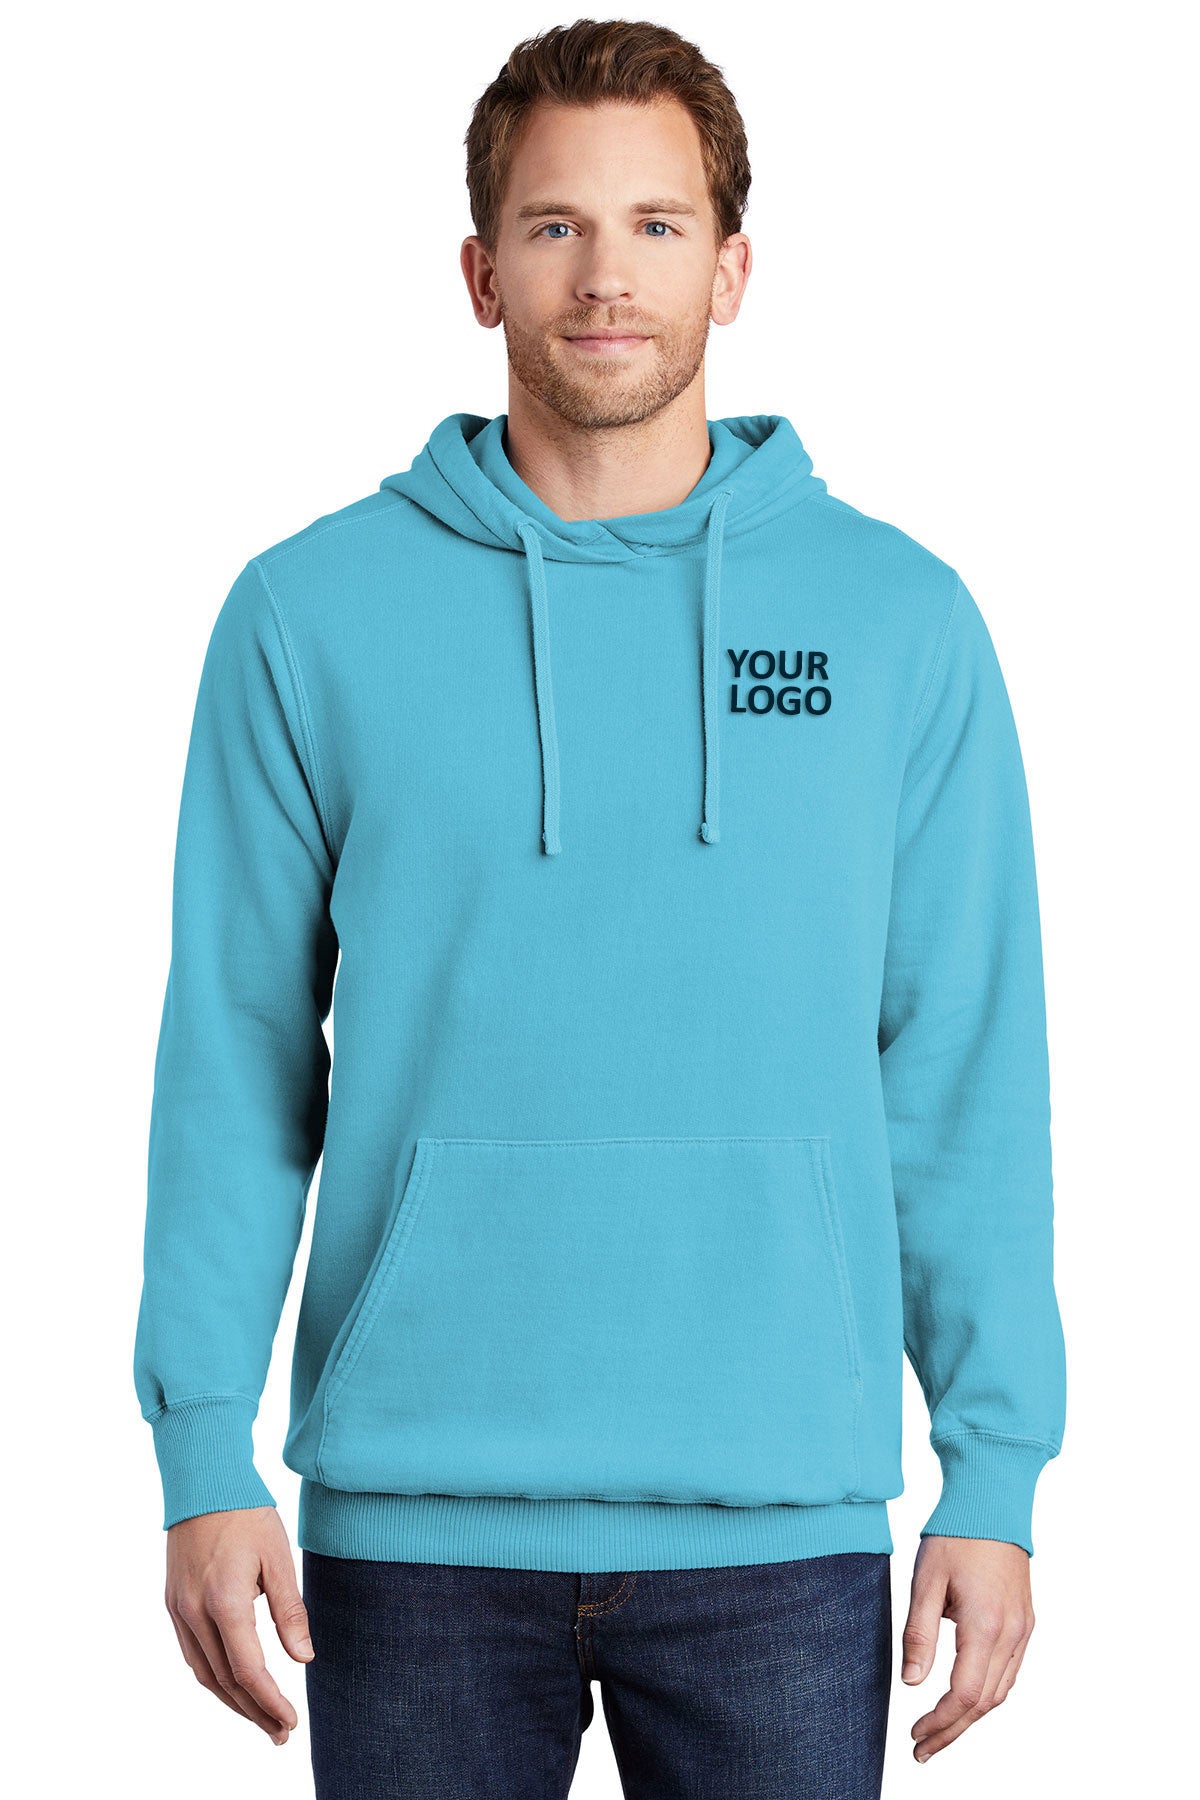 Port & Company Pigment Dyed Customized Hoodies, Tidal Wave